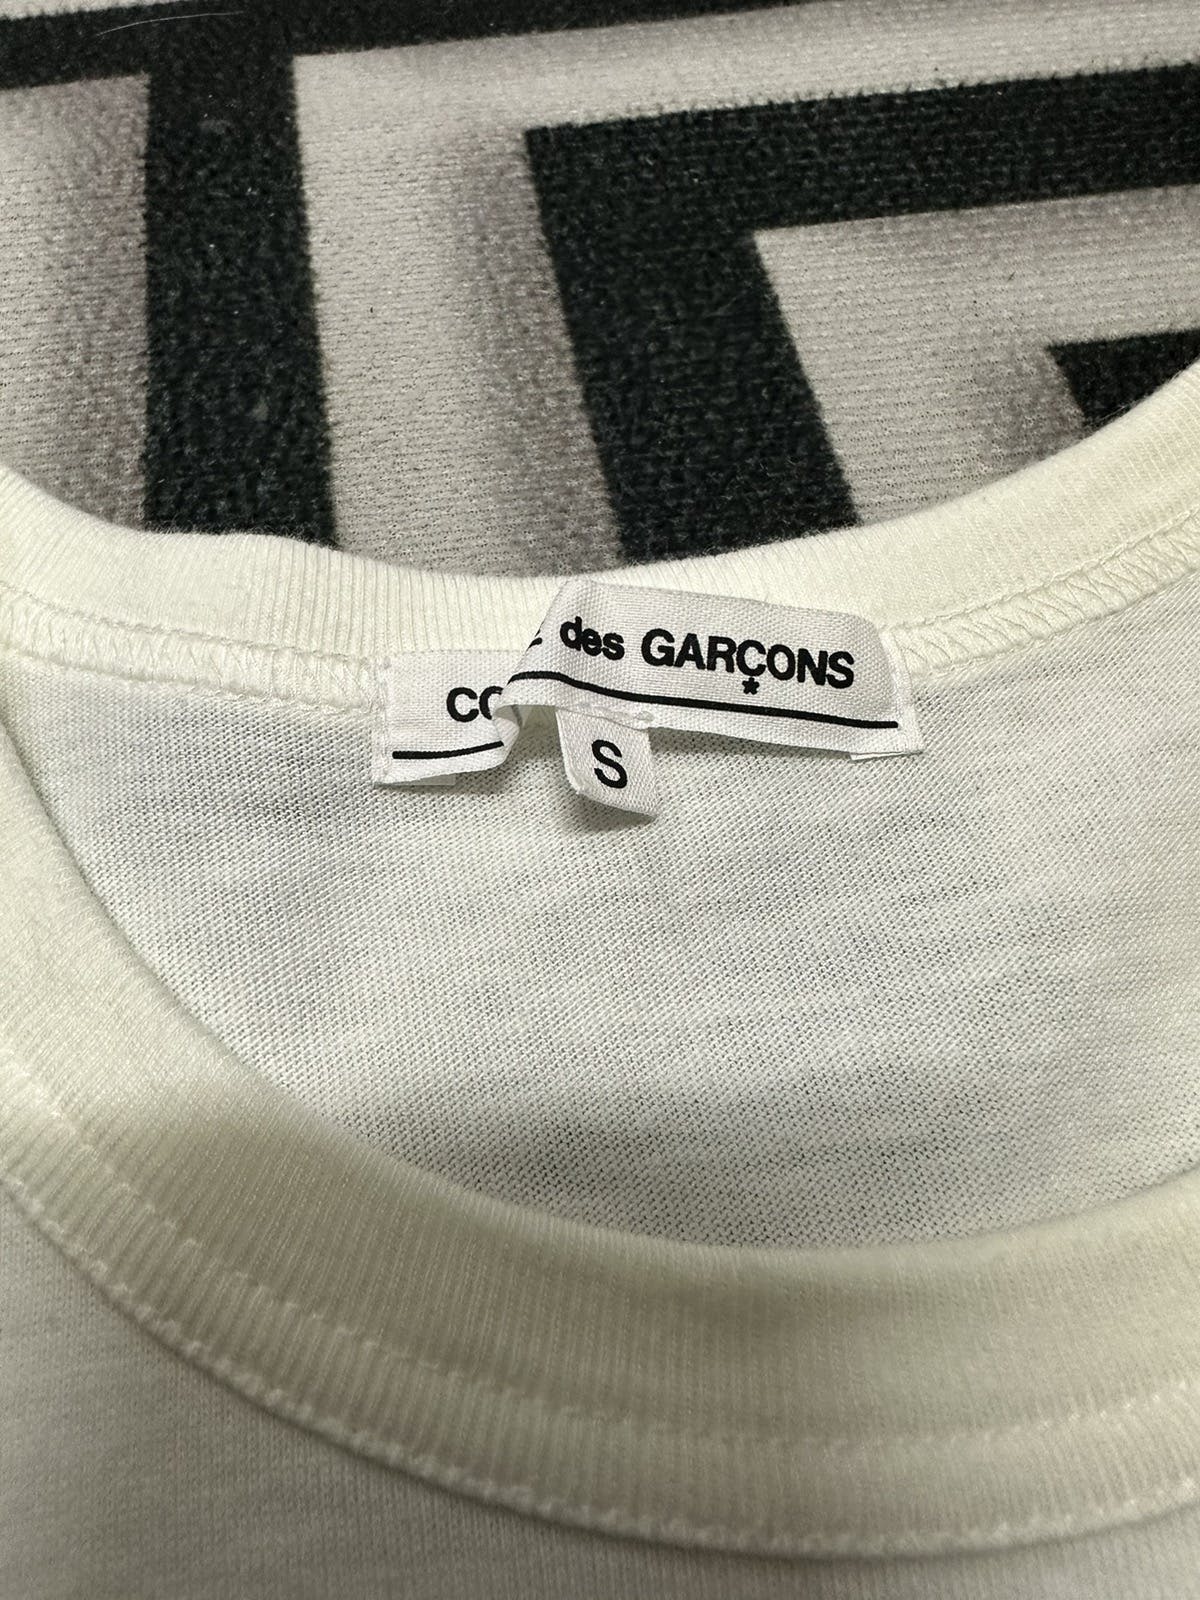 Art of science Comme des Garcons tee - 5